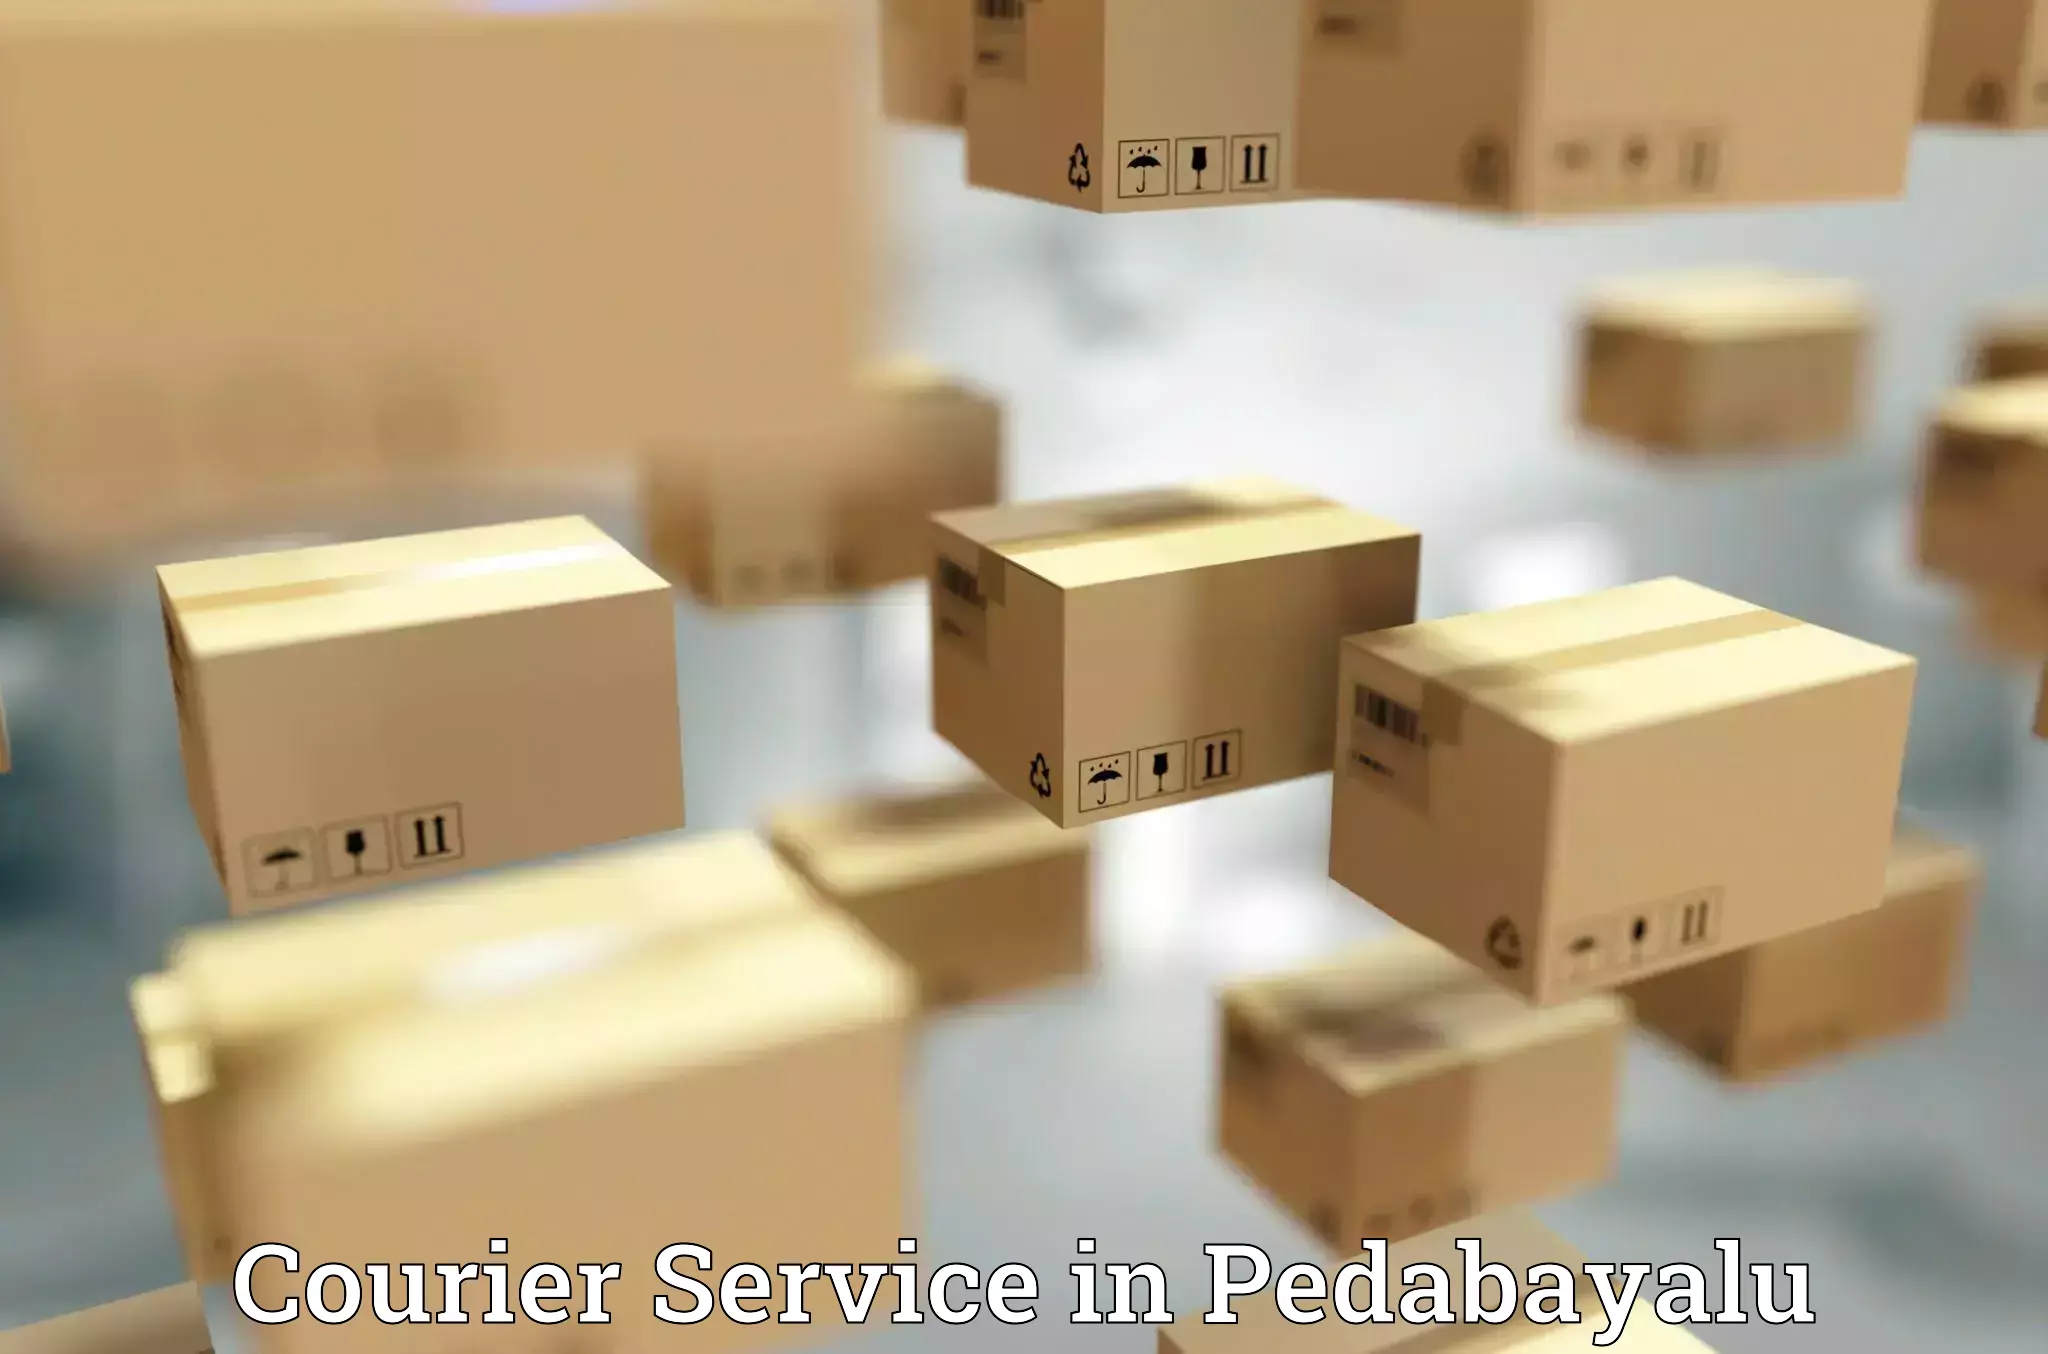 Next-day delivery options in Pedabayalu